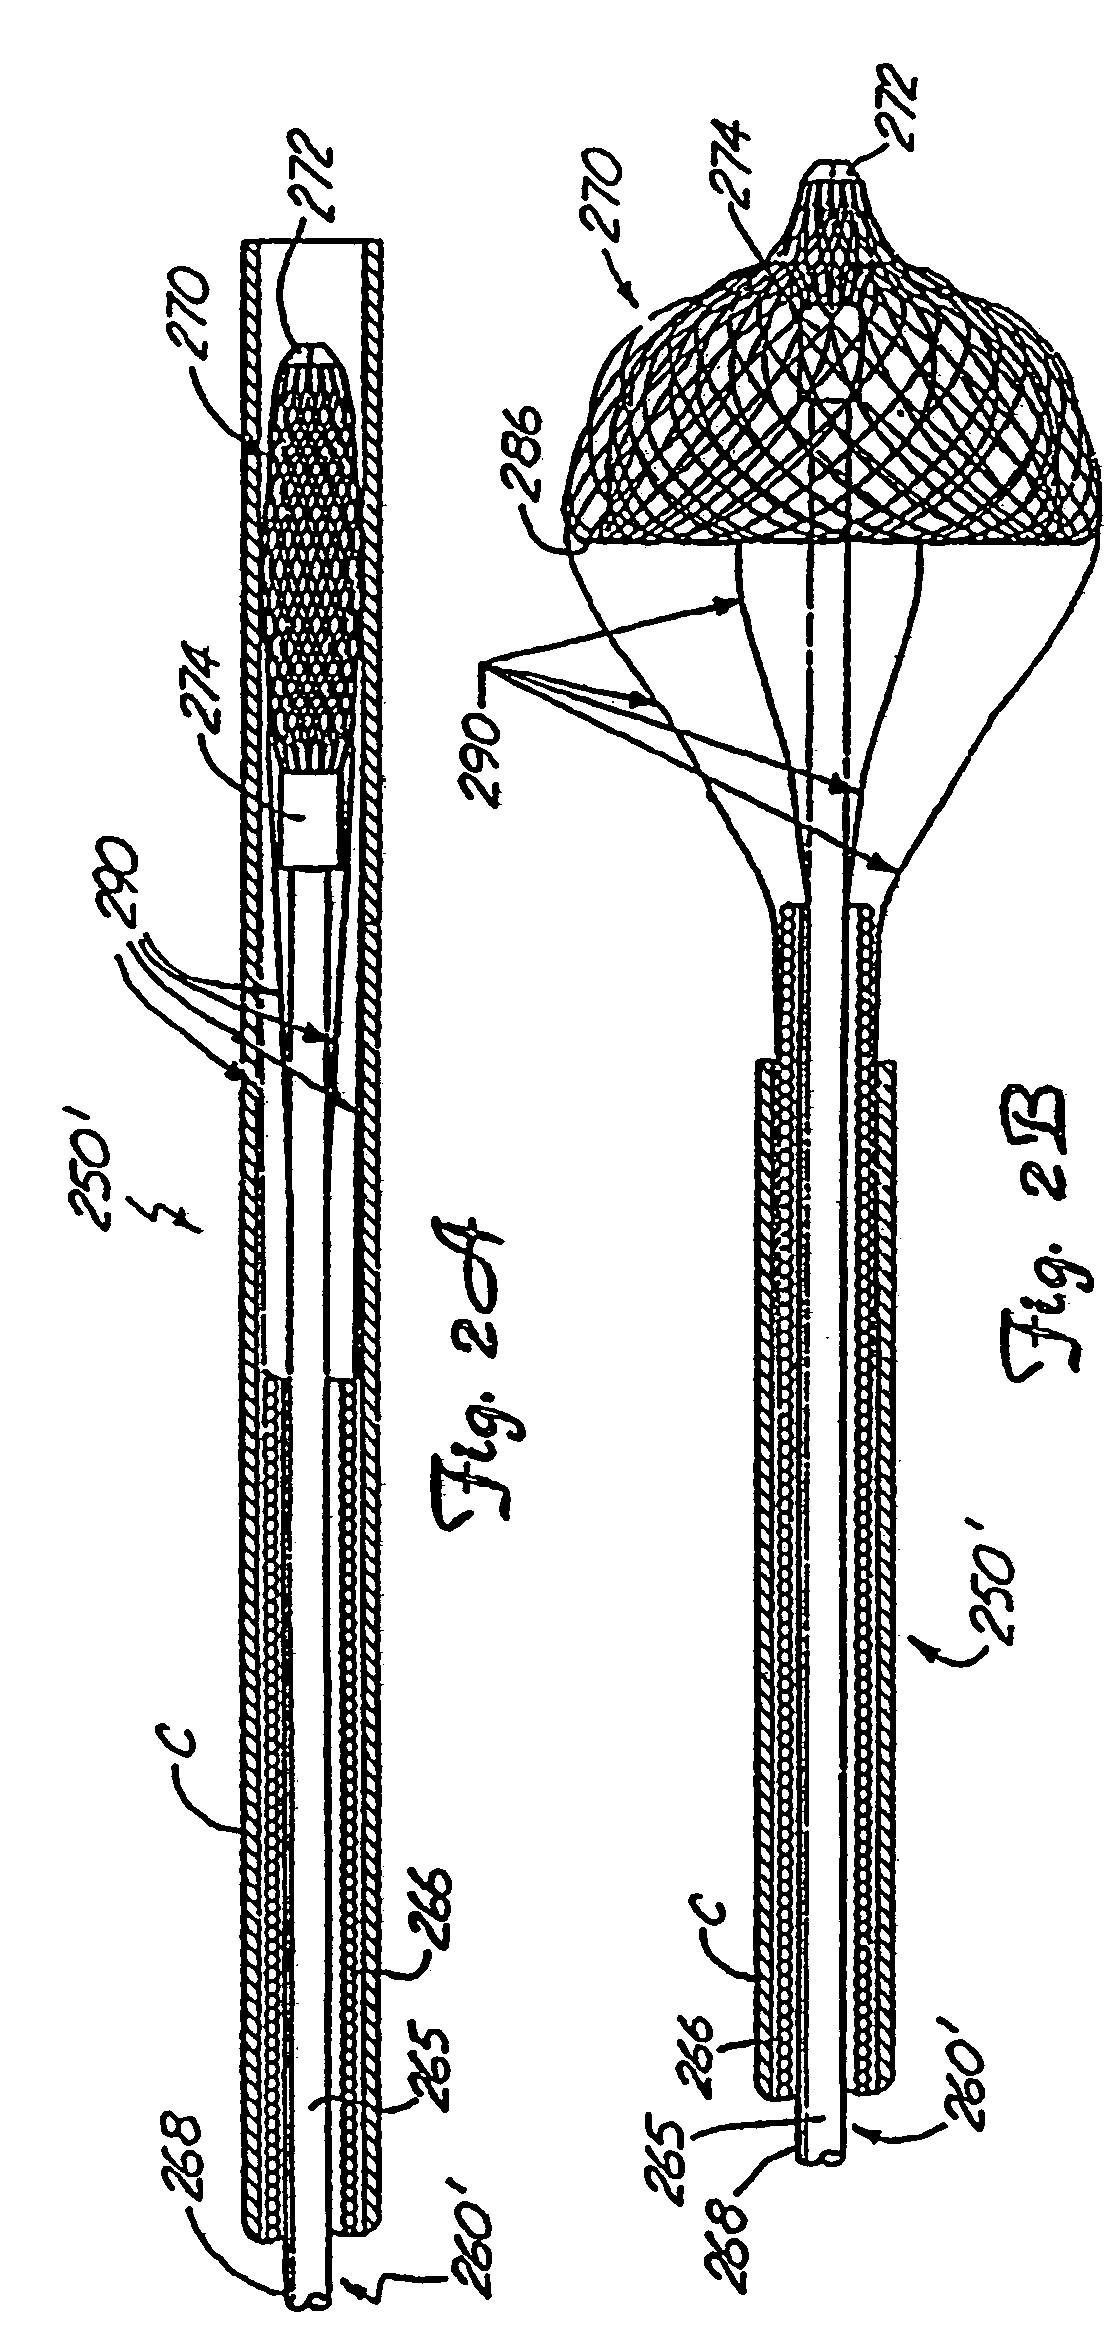 Minimally invasive medical device deployment and retrieval system